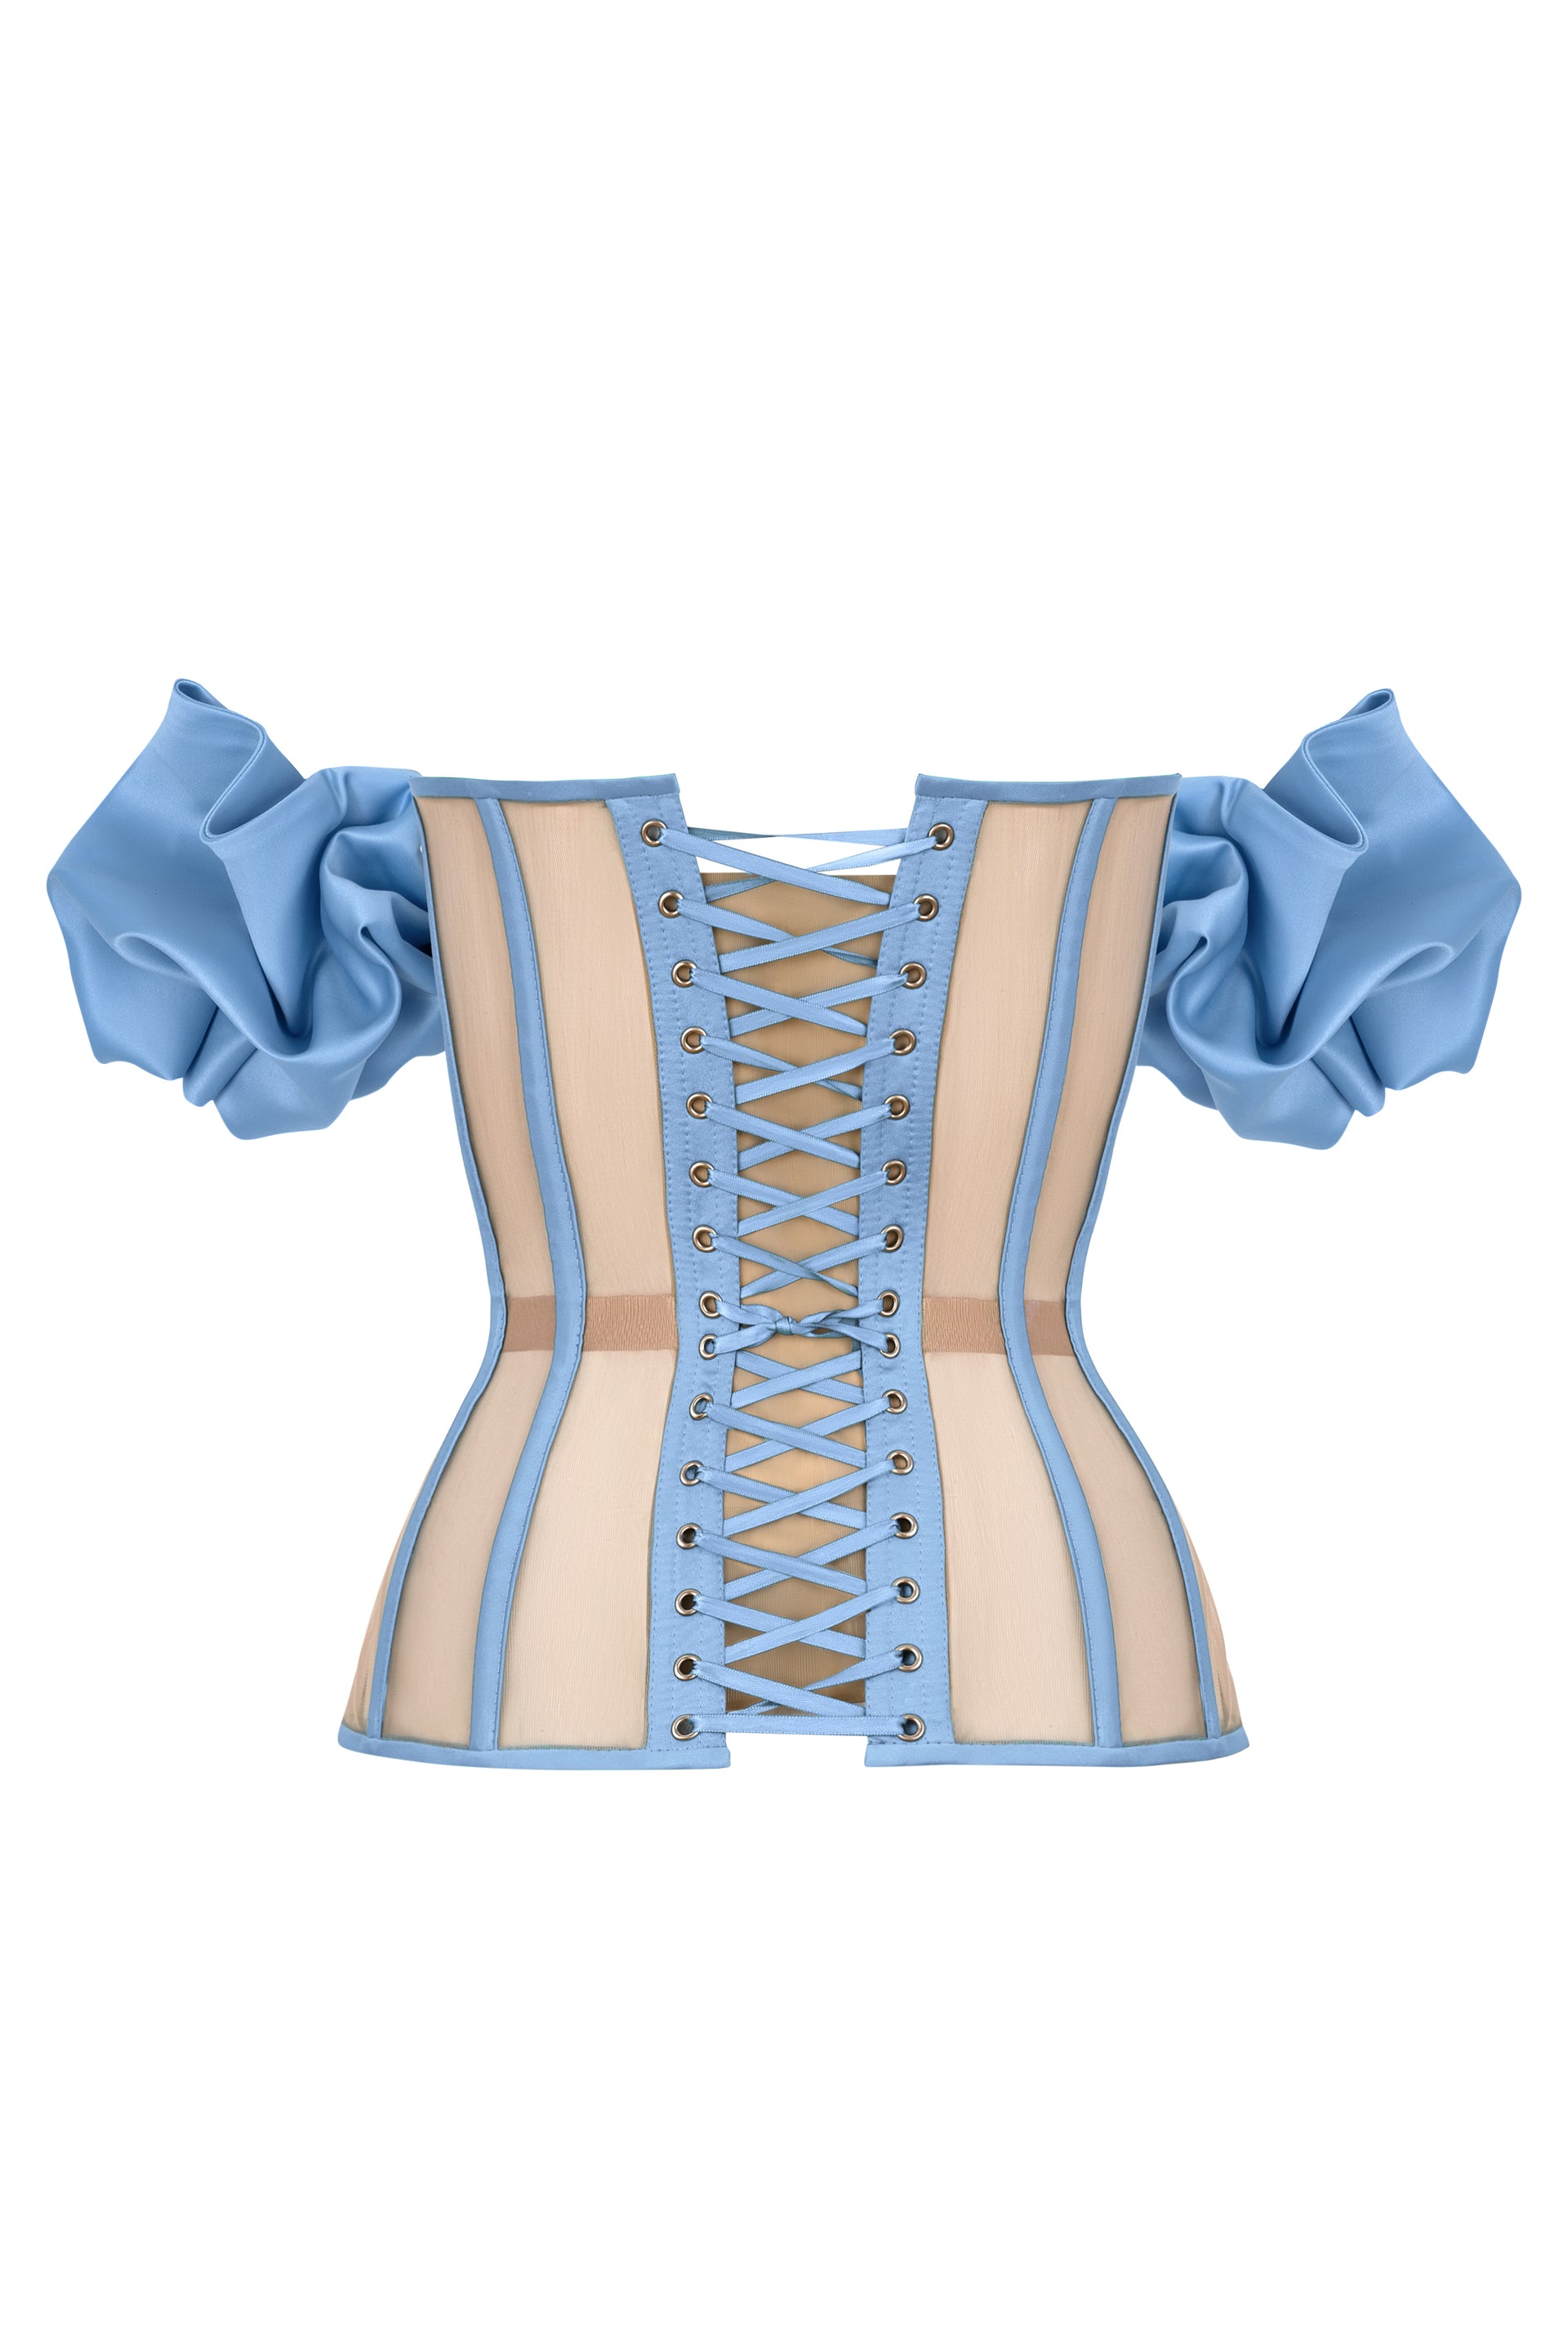 Jeans blue satin corset with transparent back and with detachable sleeves